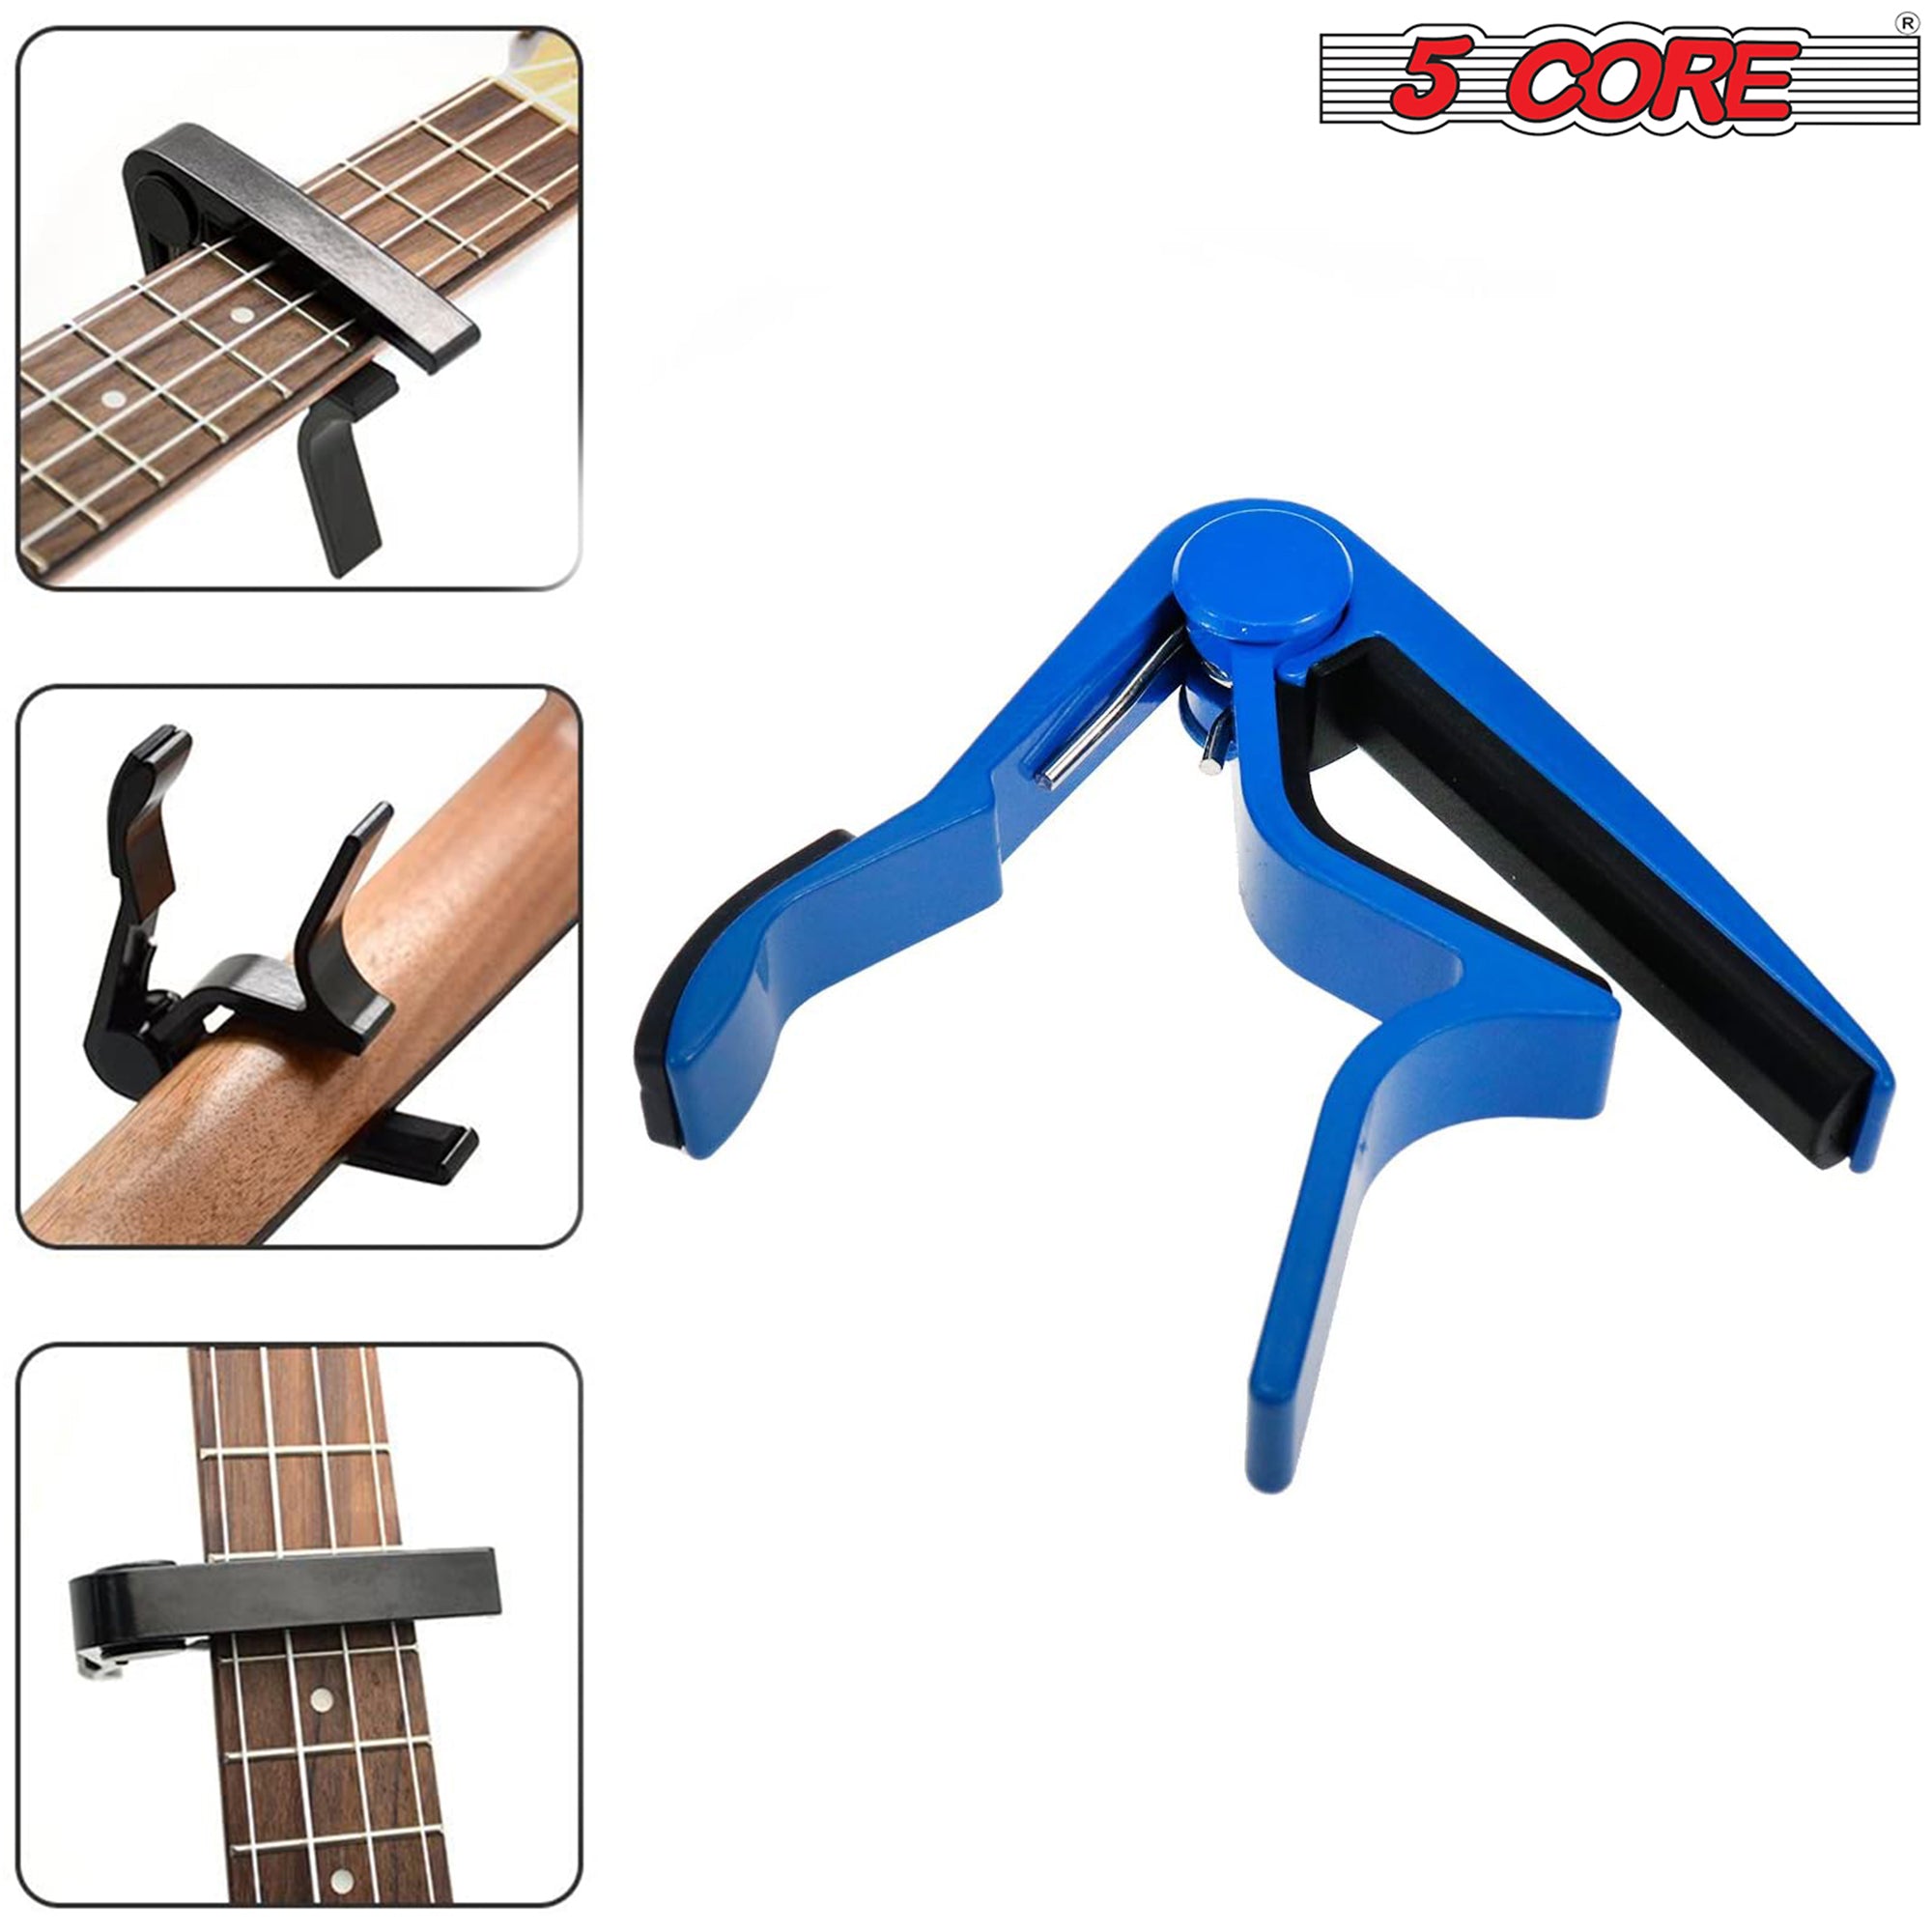 Guitar capo with a comfortable soft pad, ensuring no damage to instrument strings.